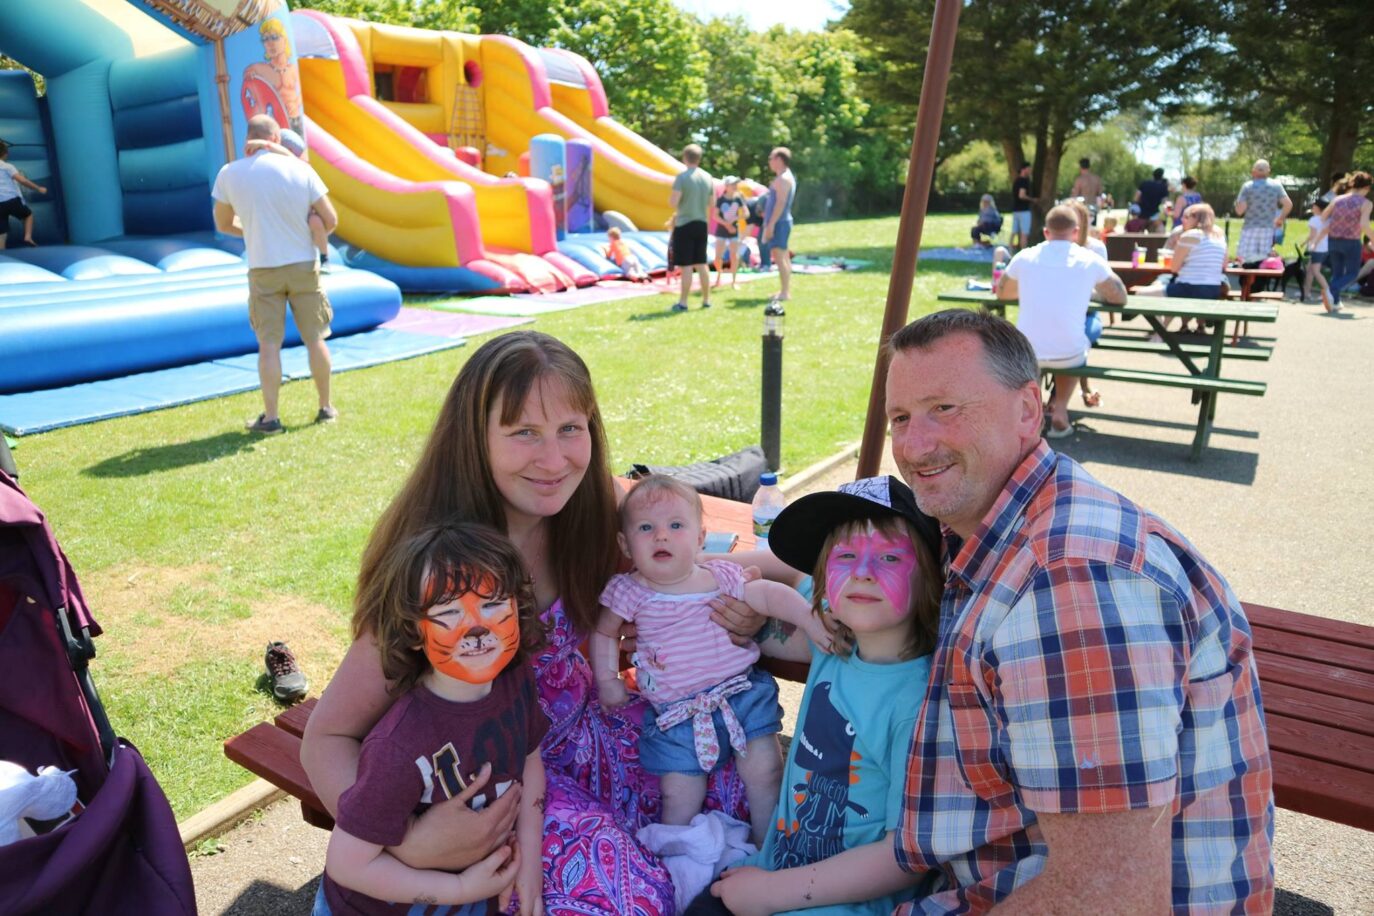 A family enjoying a sunny day at a park with a luxury bouncy castle in the background. The children have face paint, one as a tiger, and they are all smiling. There are other people